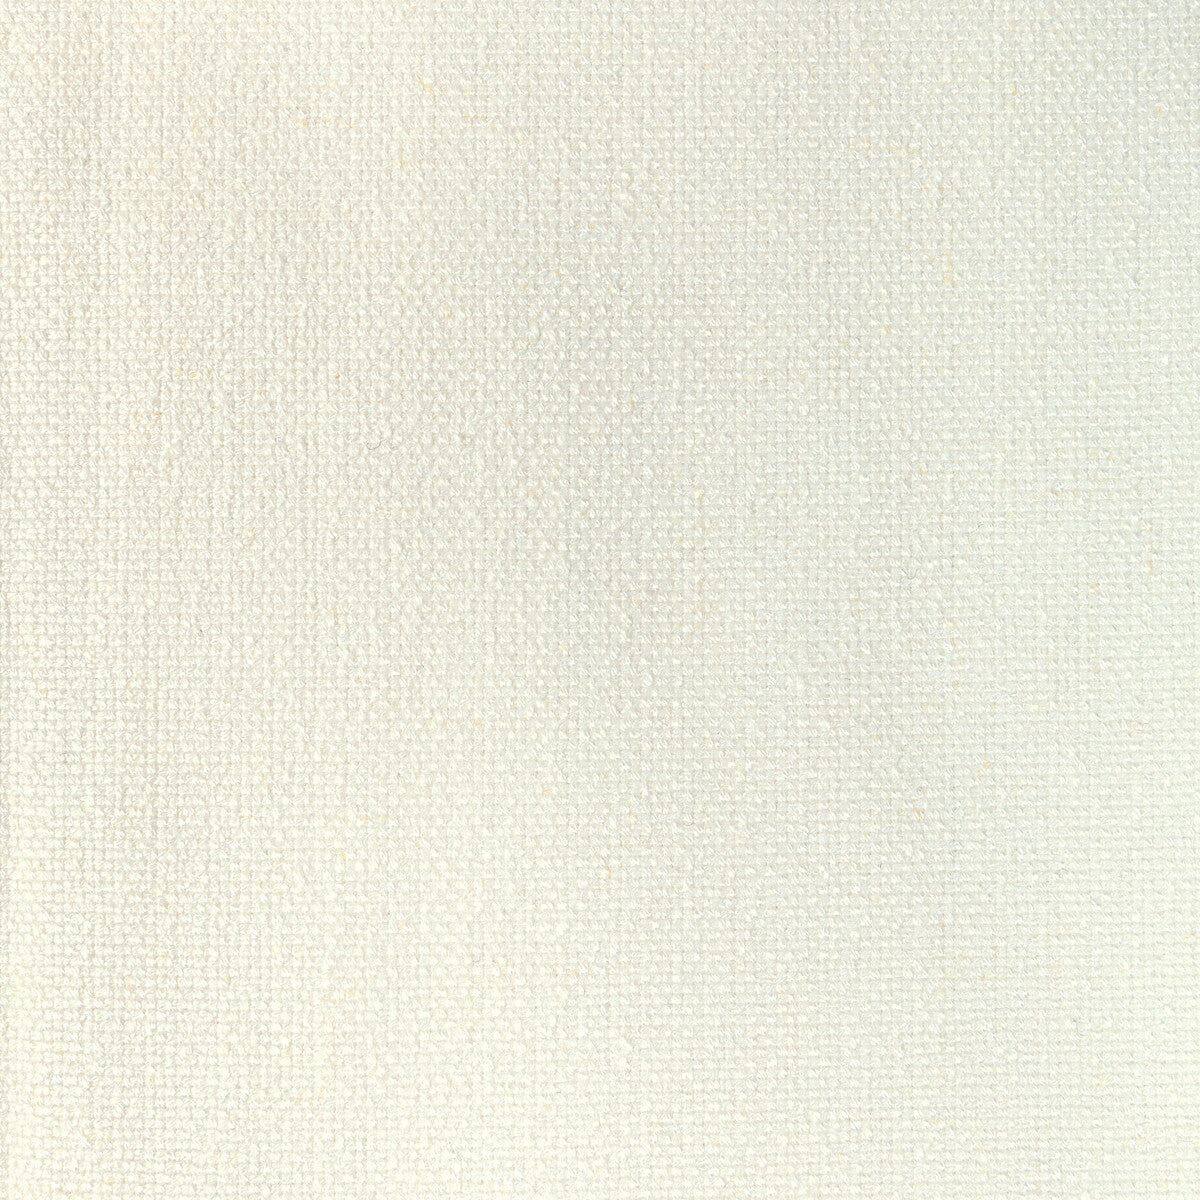 Rospico Plain fabric in ivory color - pattern 8022110.1.0 - by Brunschwig &amp; Fils in the Lorient Weaves collection